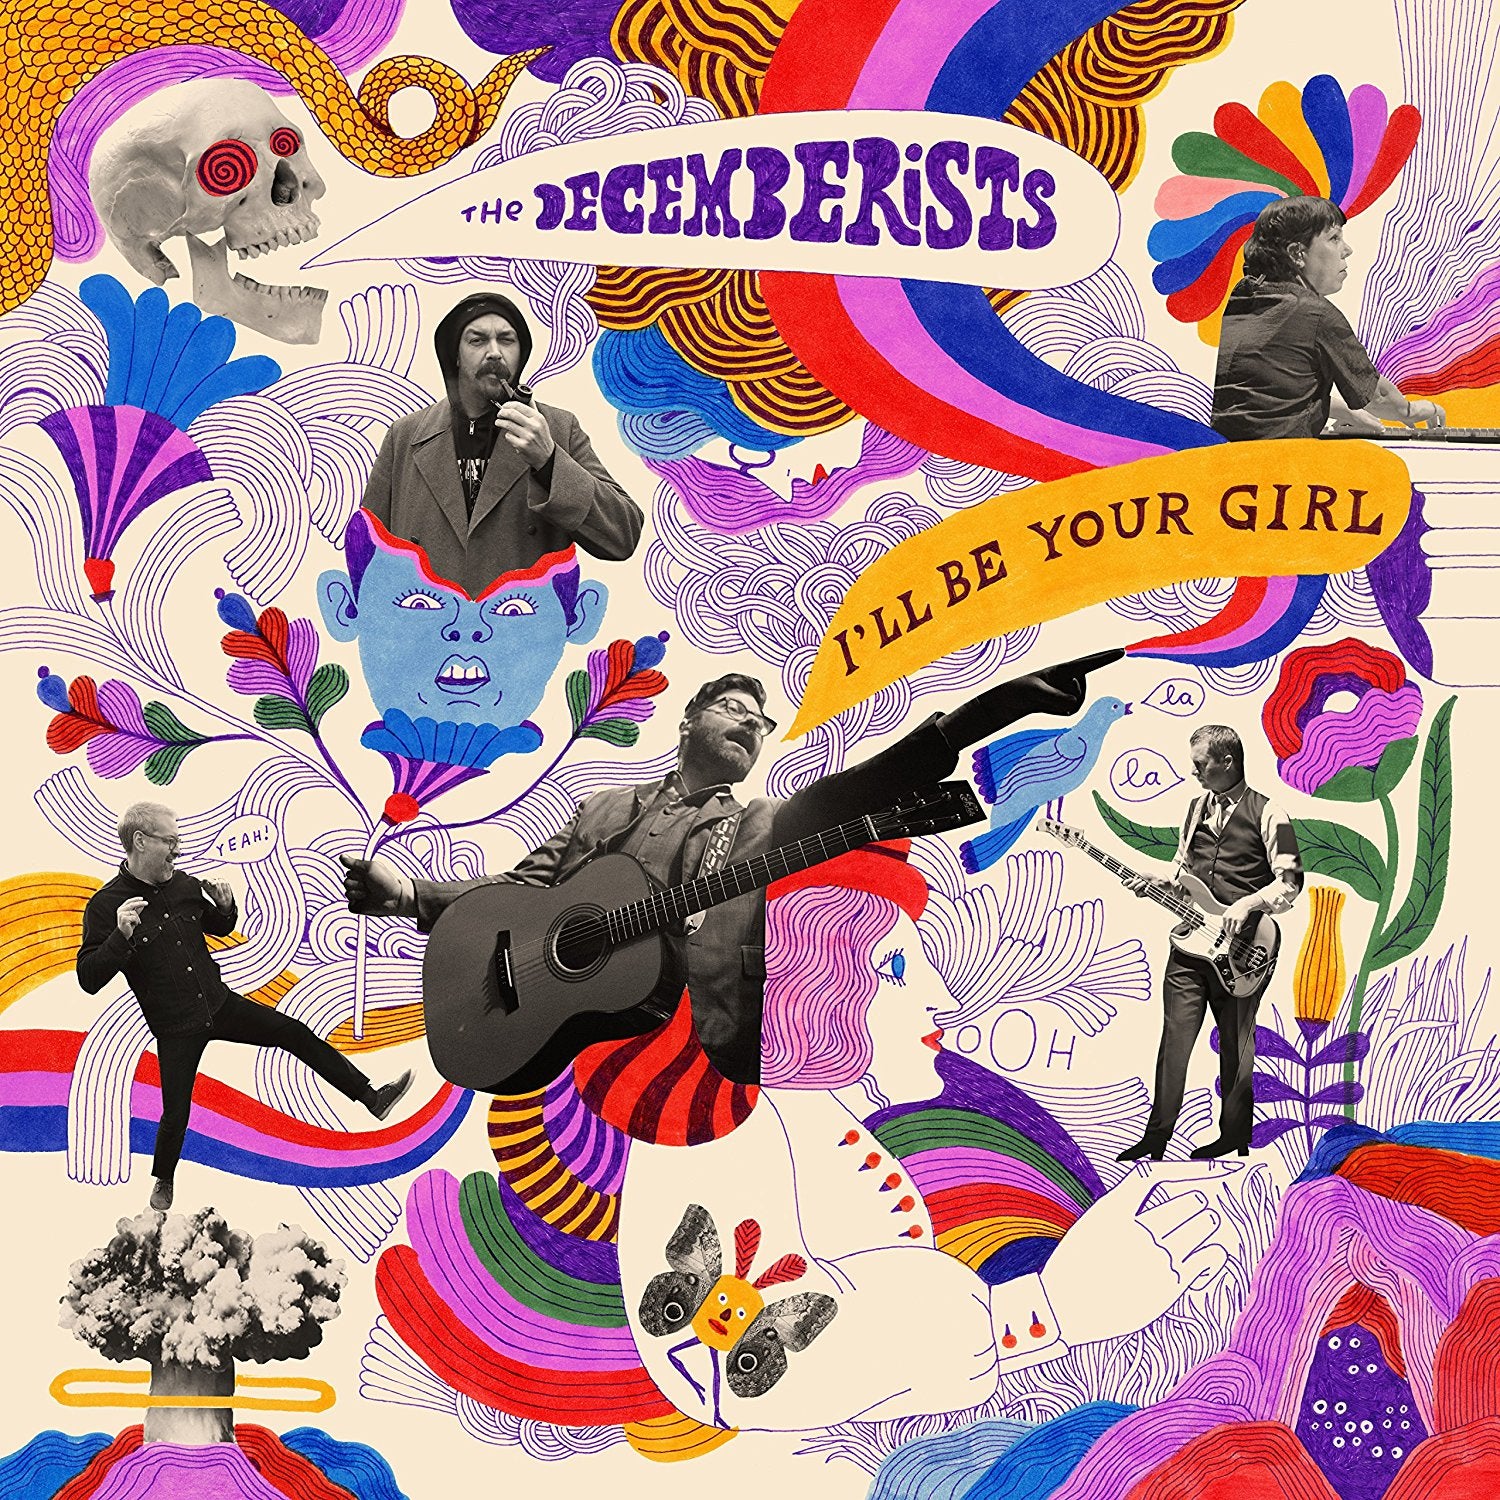 The Decemberists | I'll Be Your Girl [LP] | Vinyl